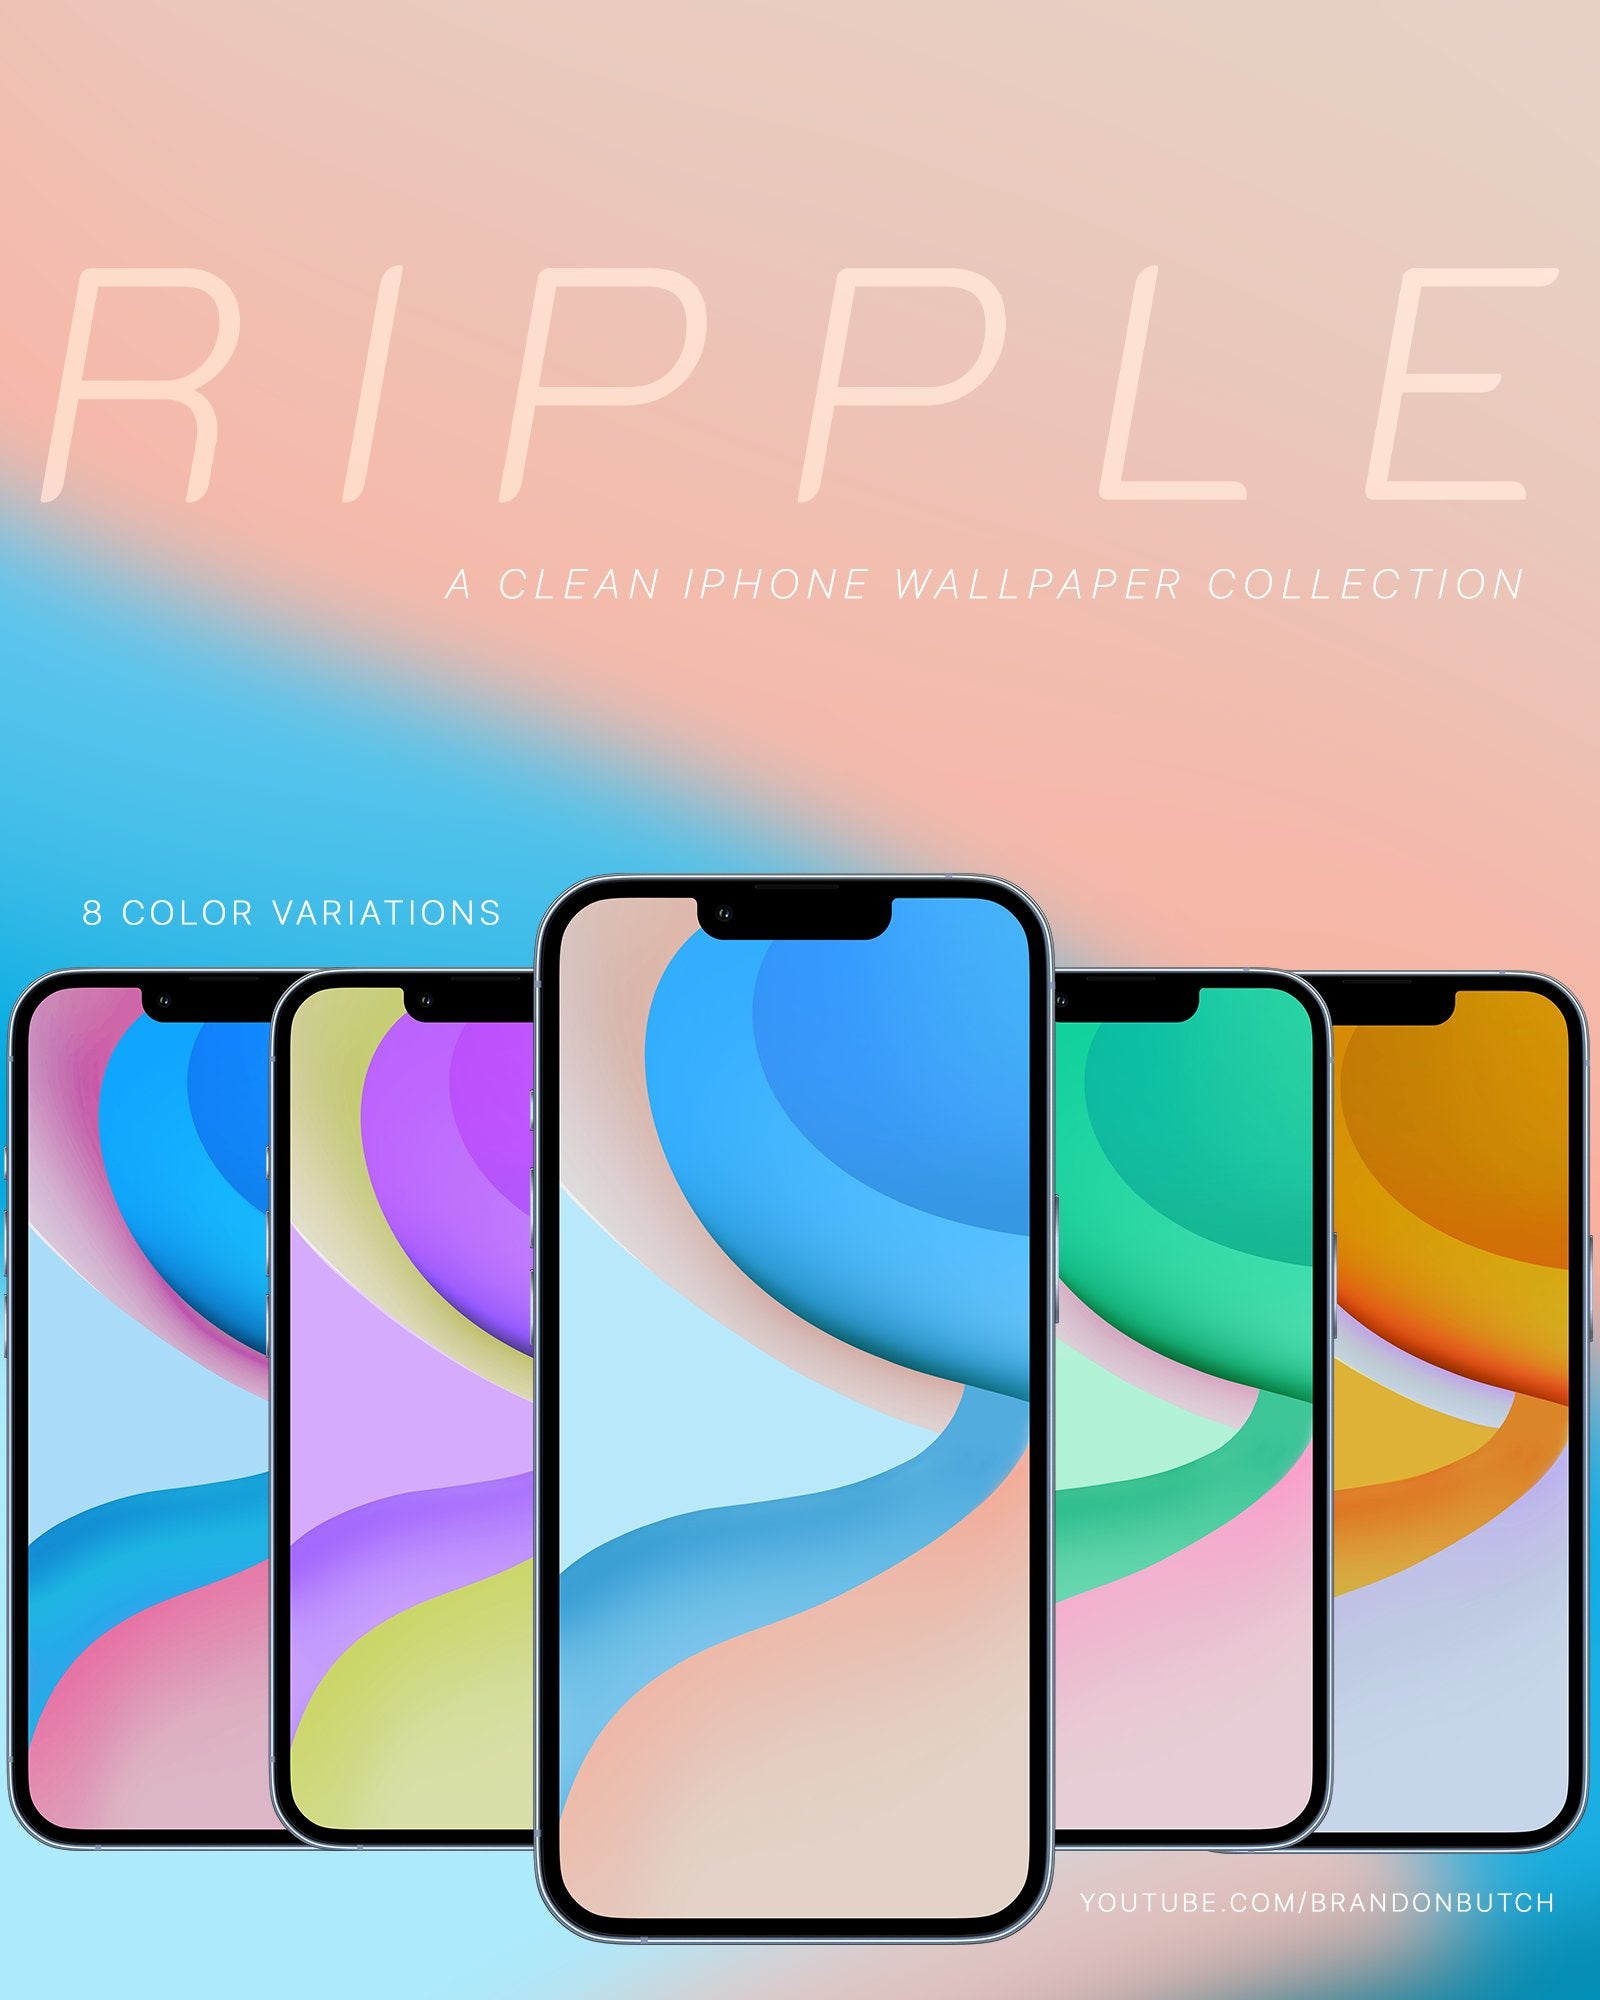 Does anyone have these wallpapers by brandon butch if so is there a link to download them riphonewallpapers